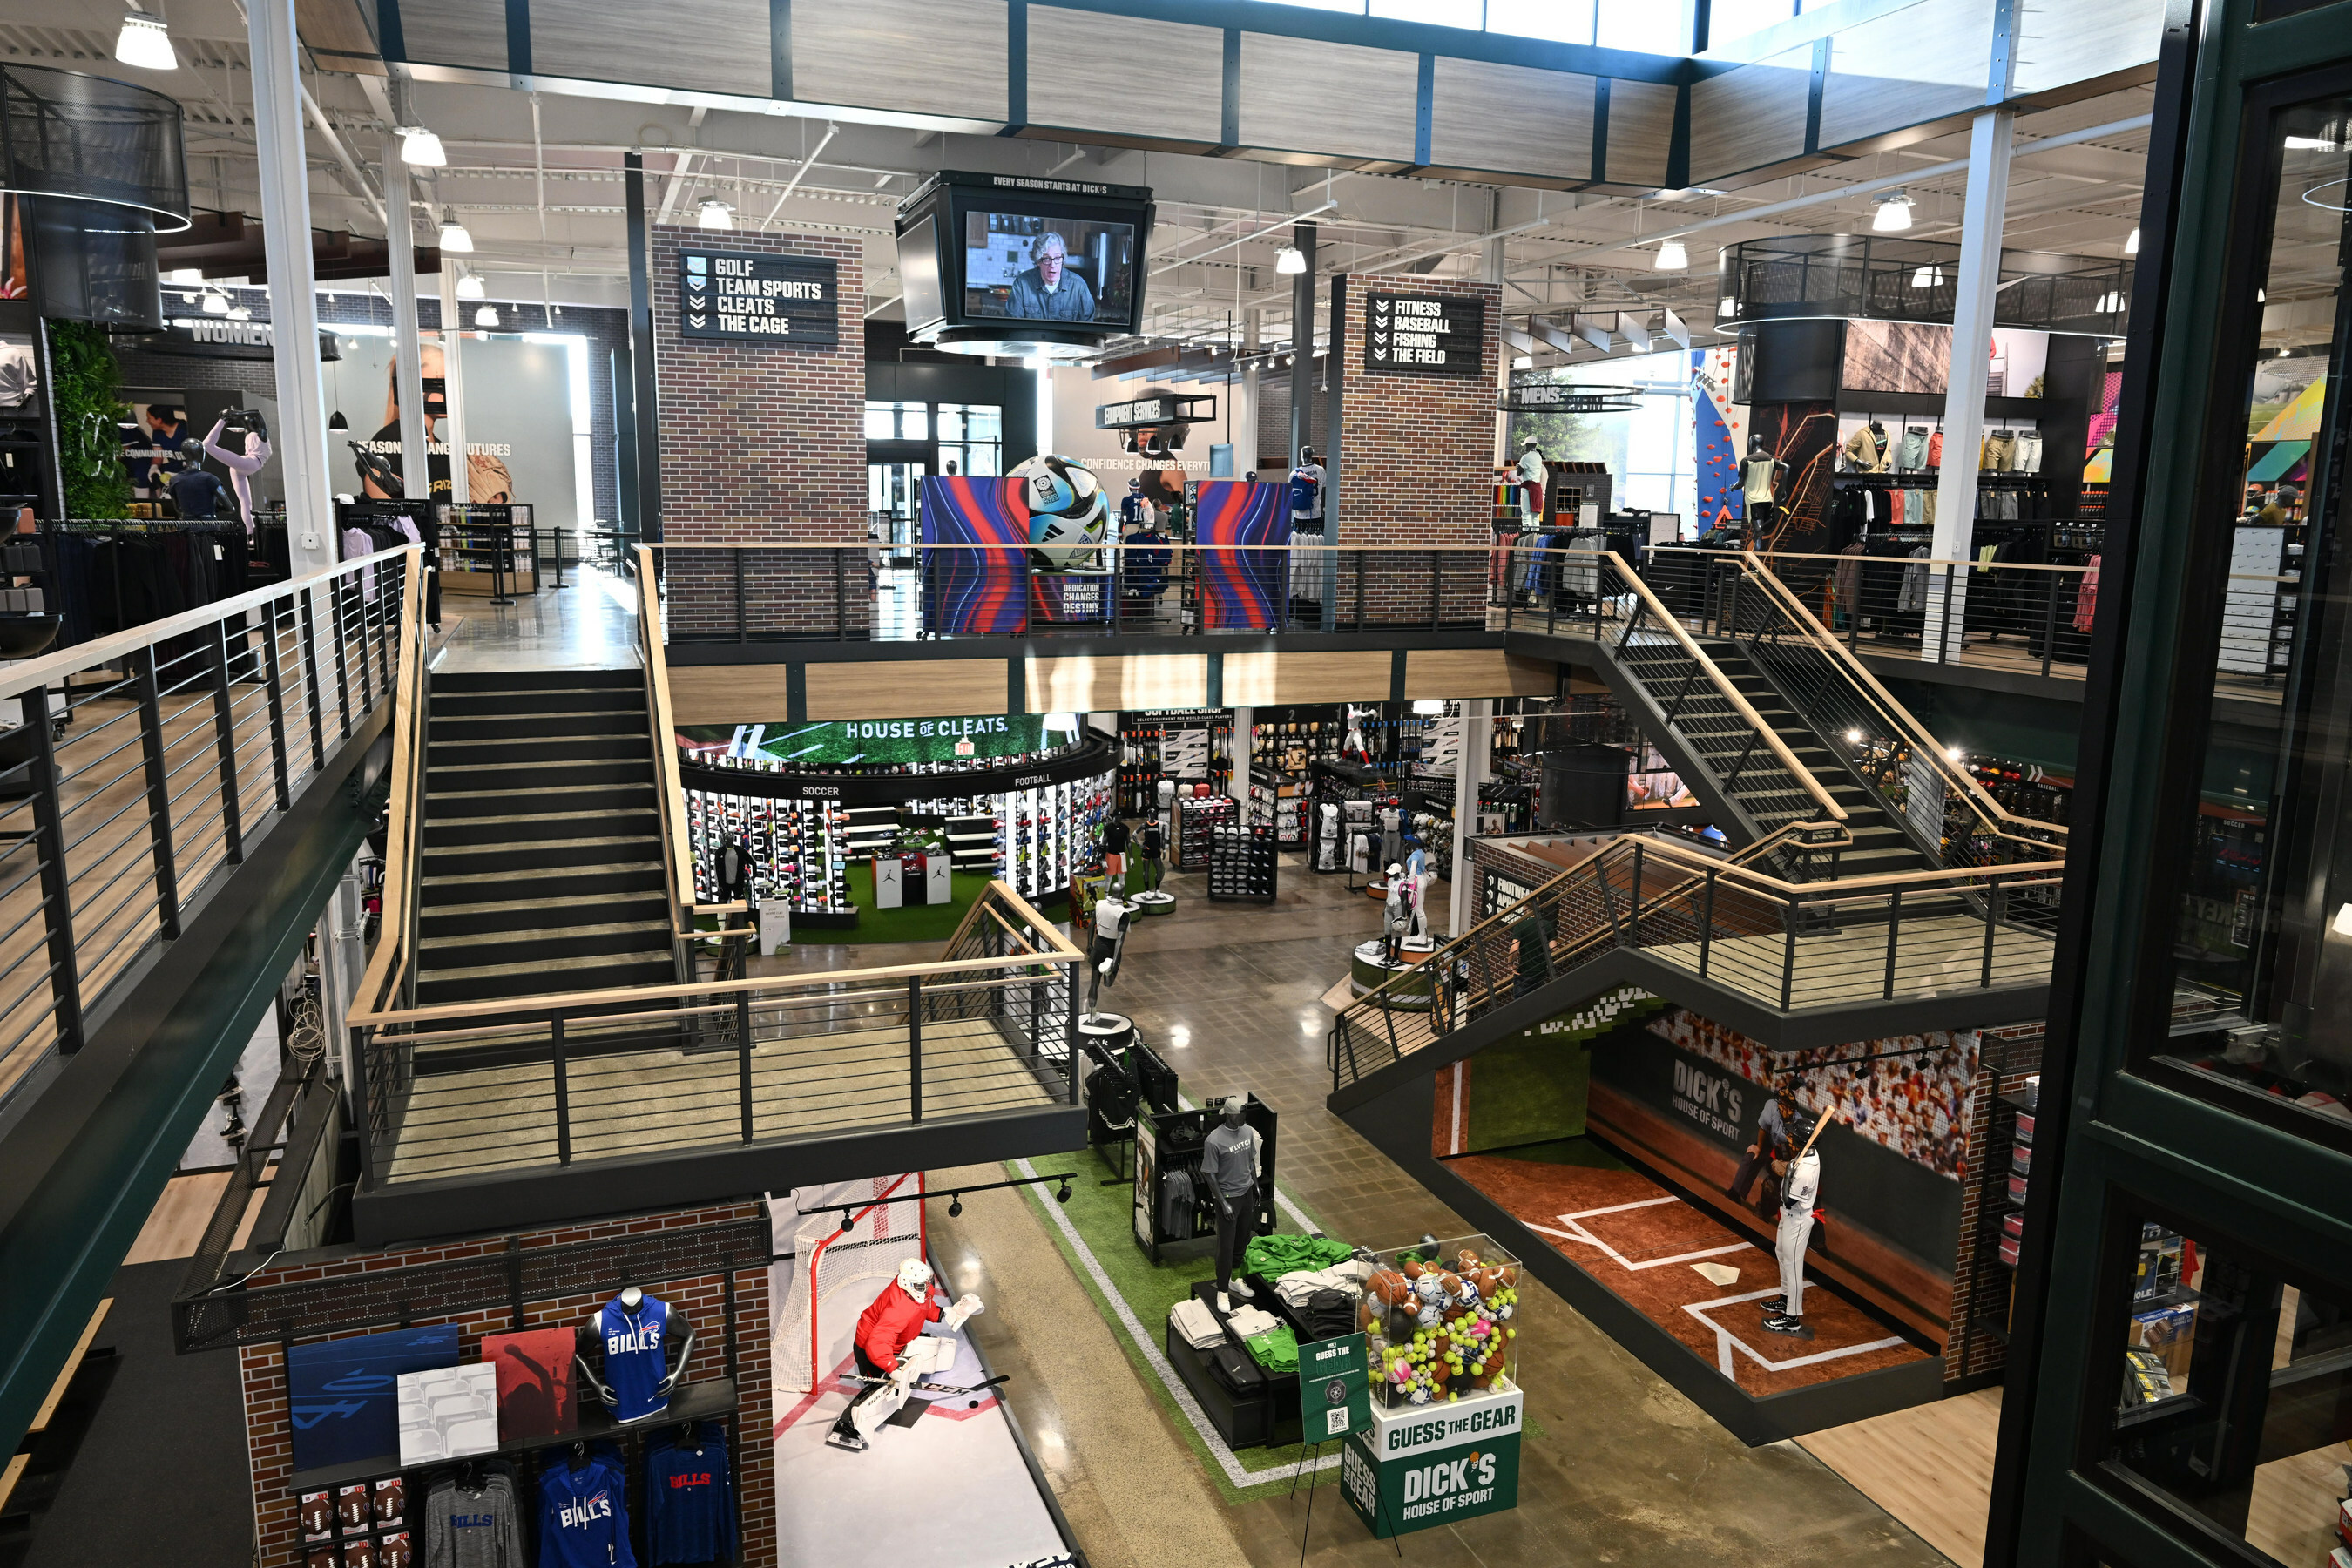 Dick's Sporting Goods invests in concept stores to drive growth